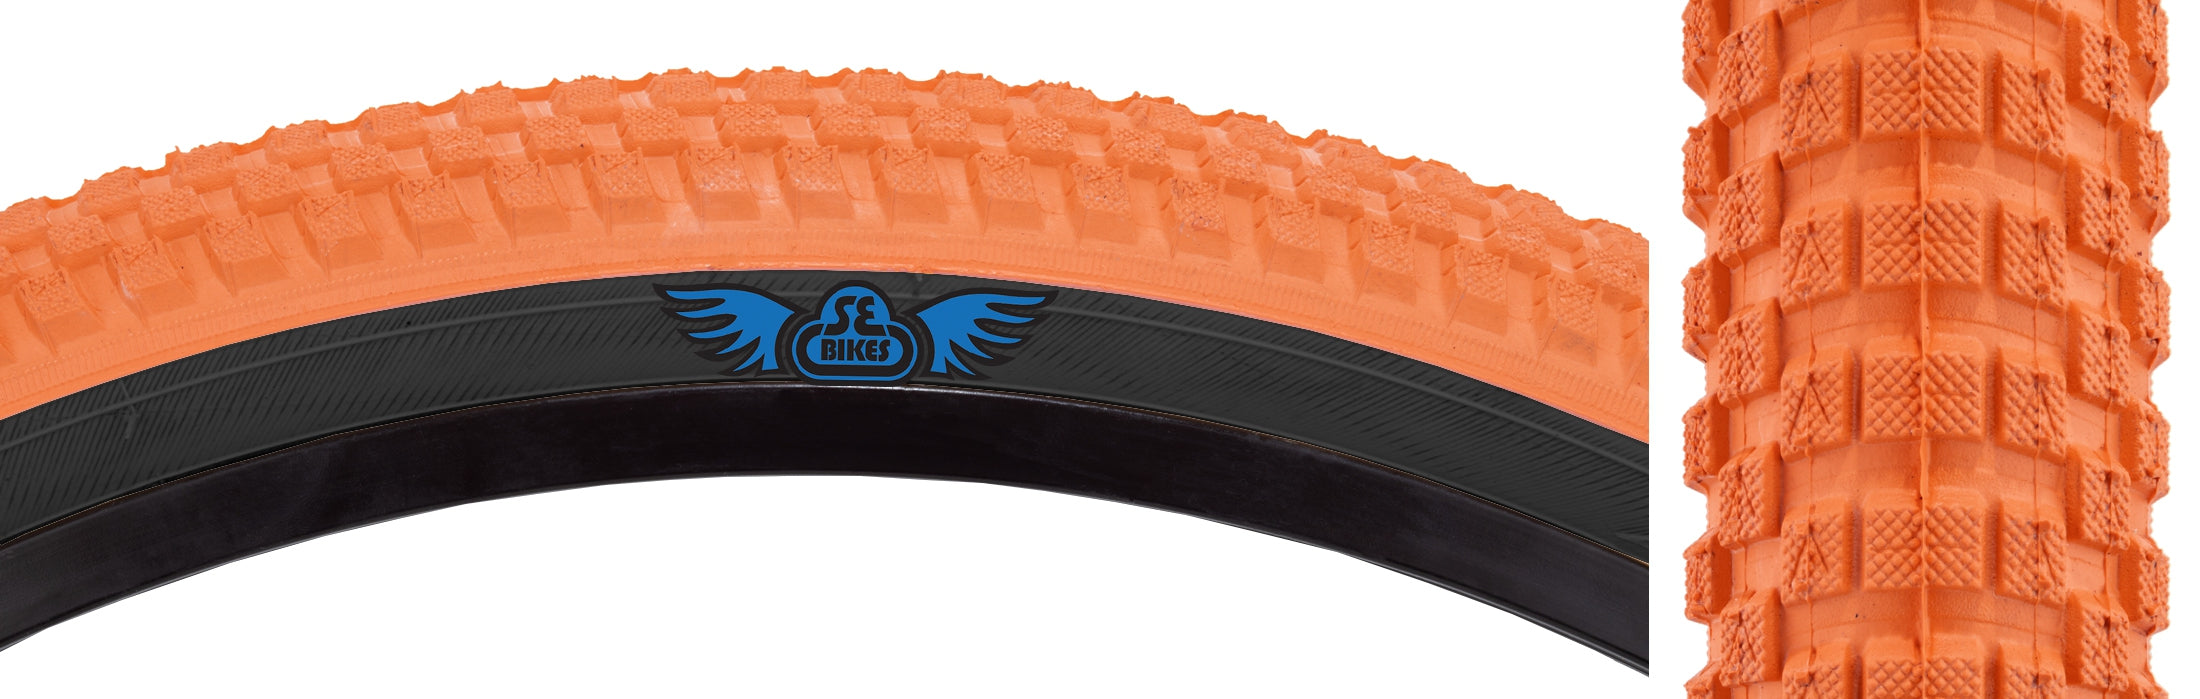 side view of cub tire in orange